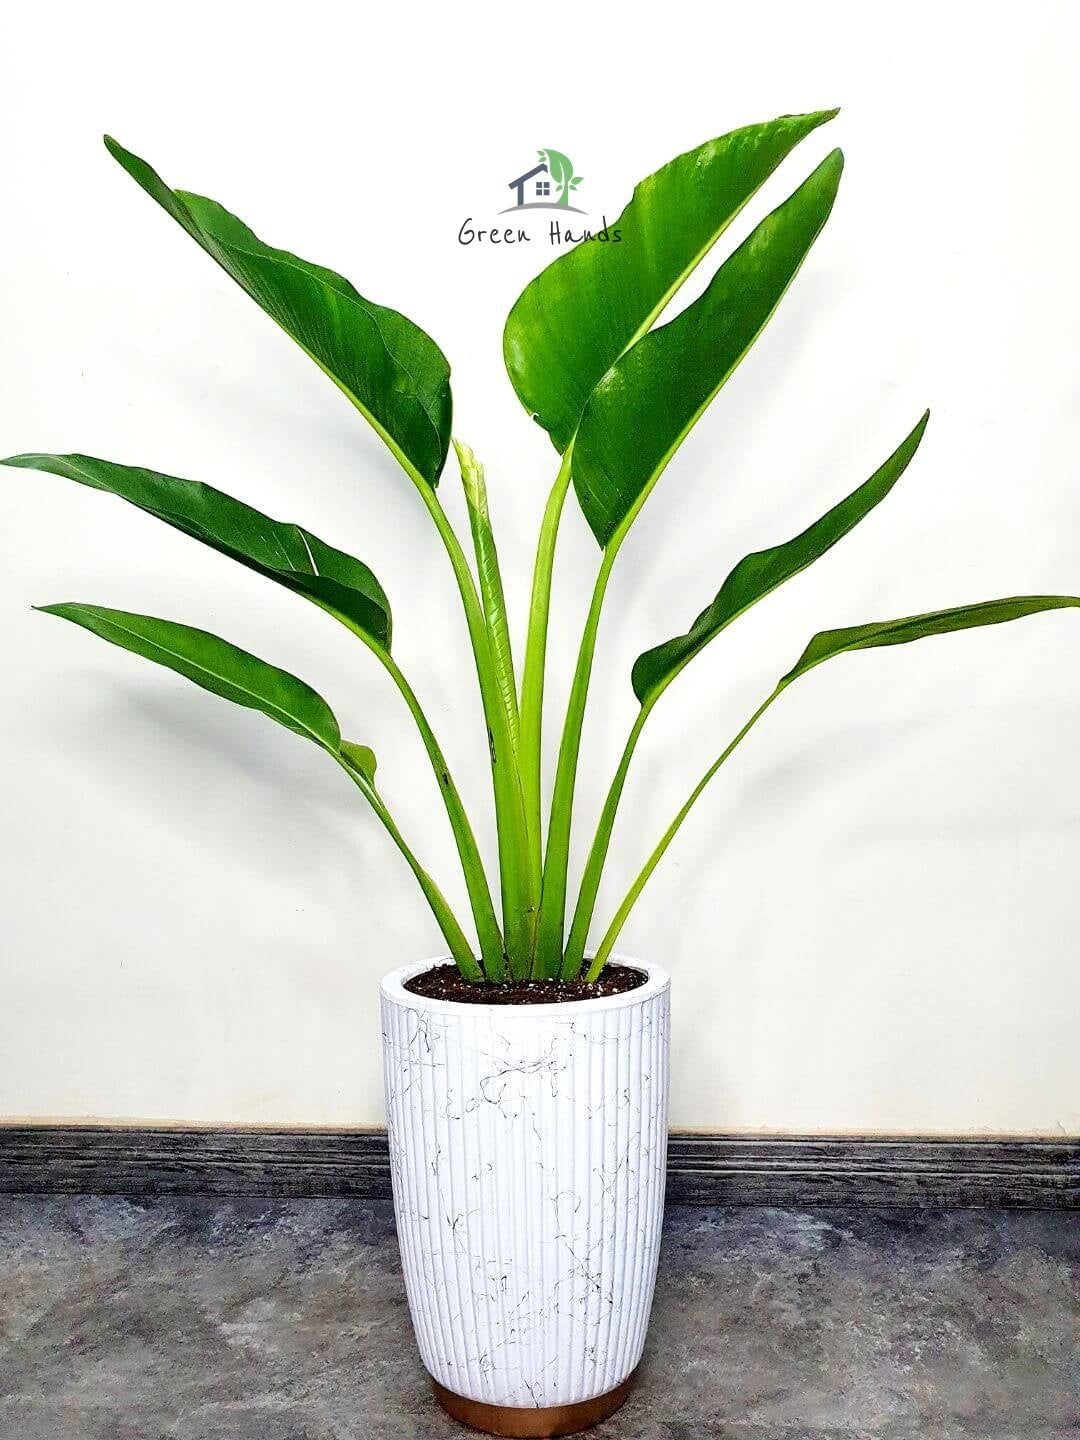 Potted Traveller's Palm Planted in White Pot